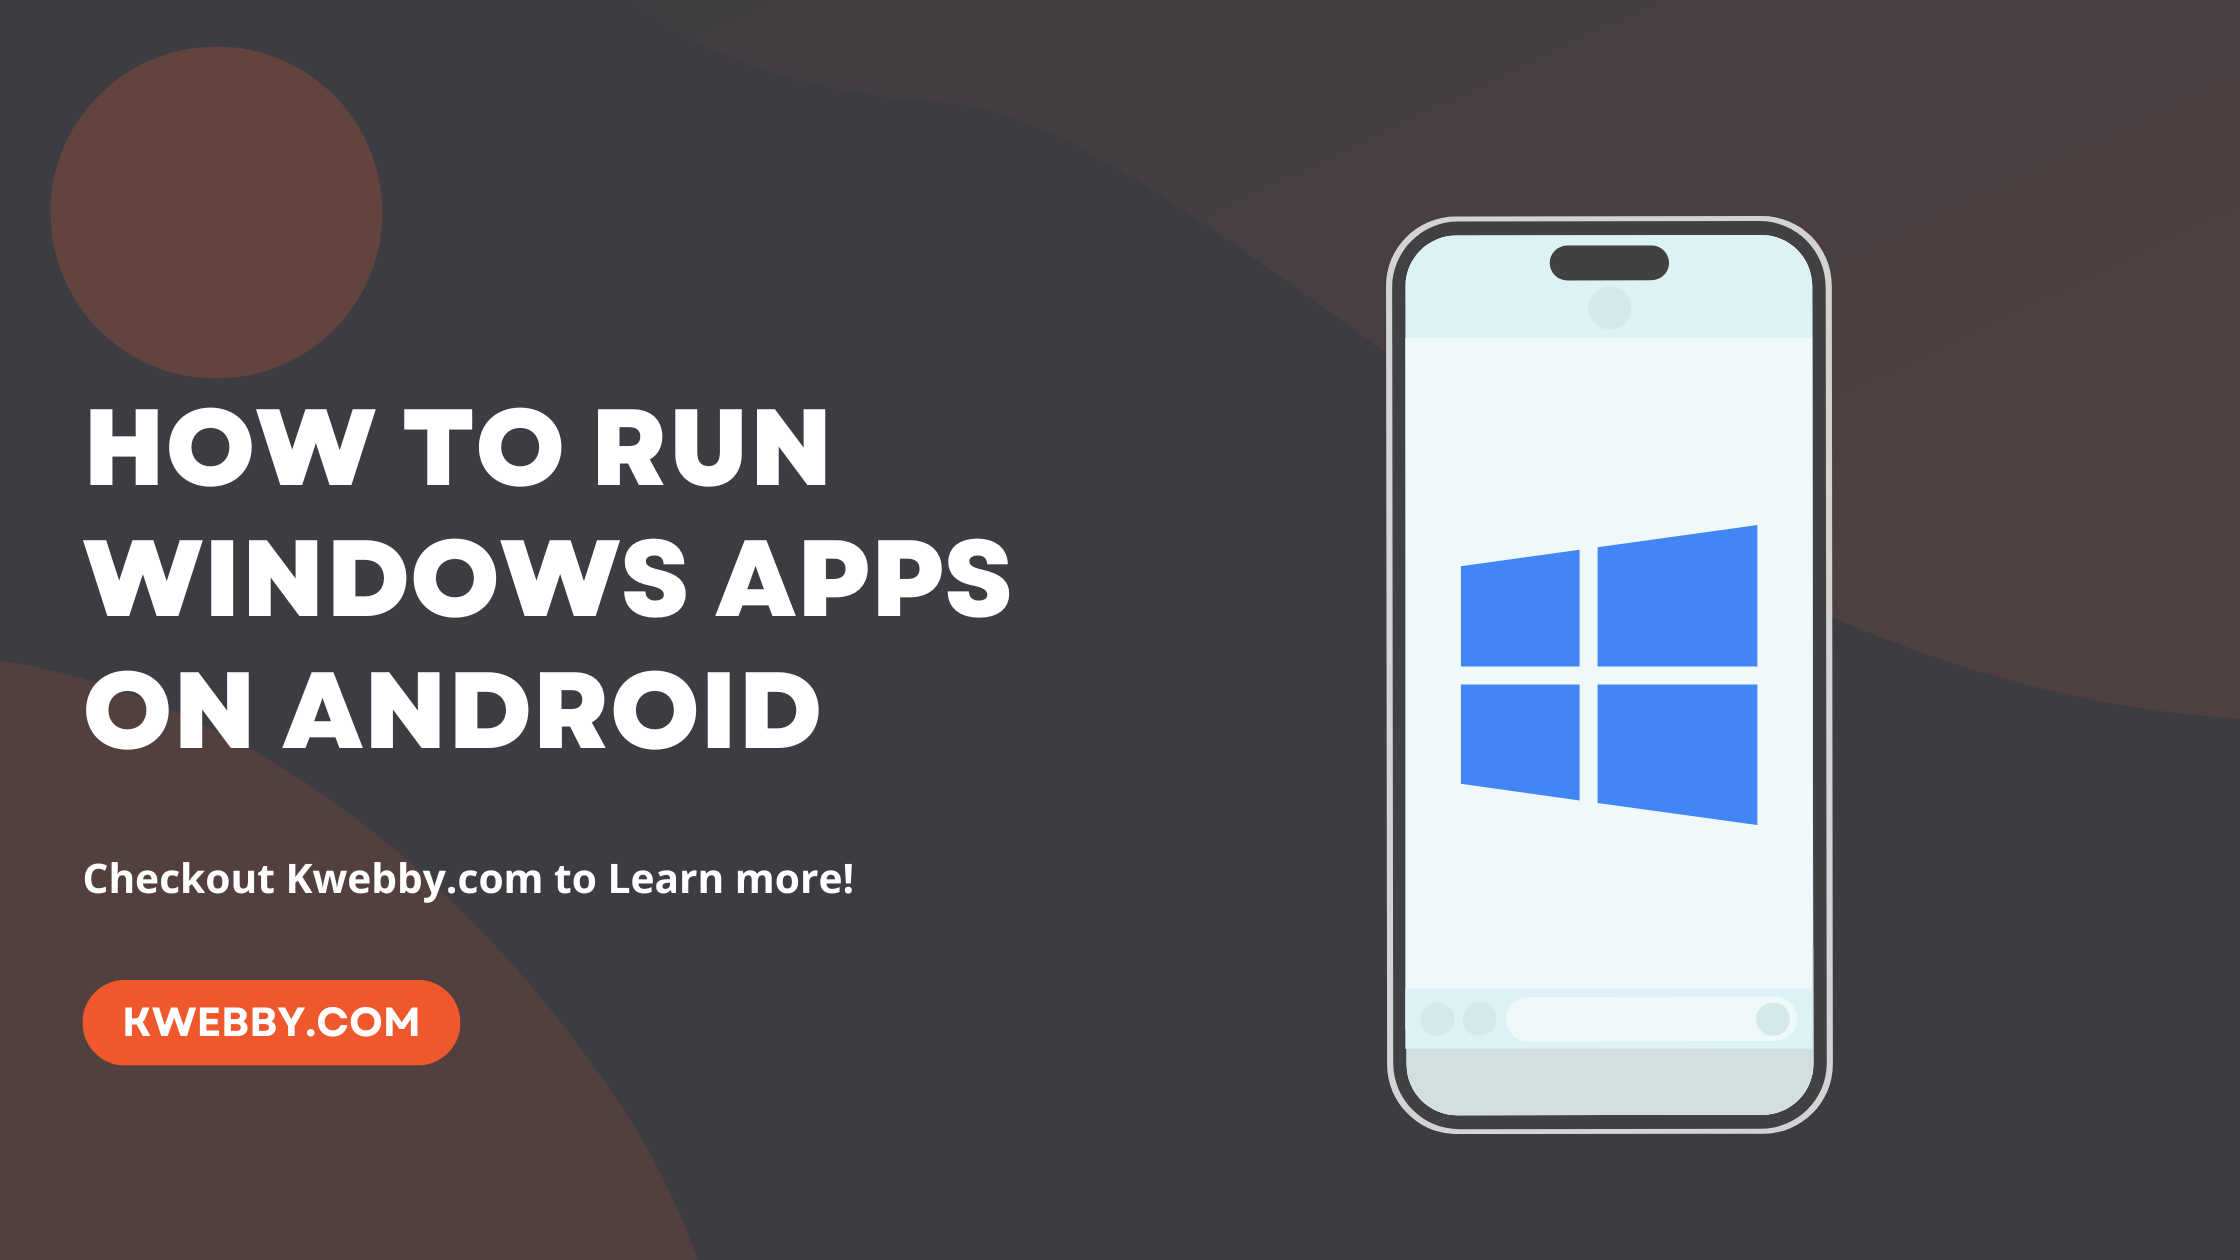 How to run Windows apps on Android